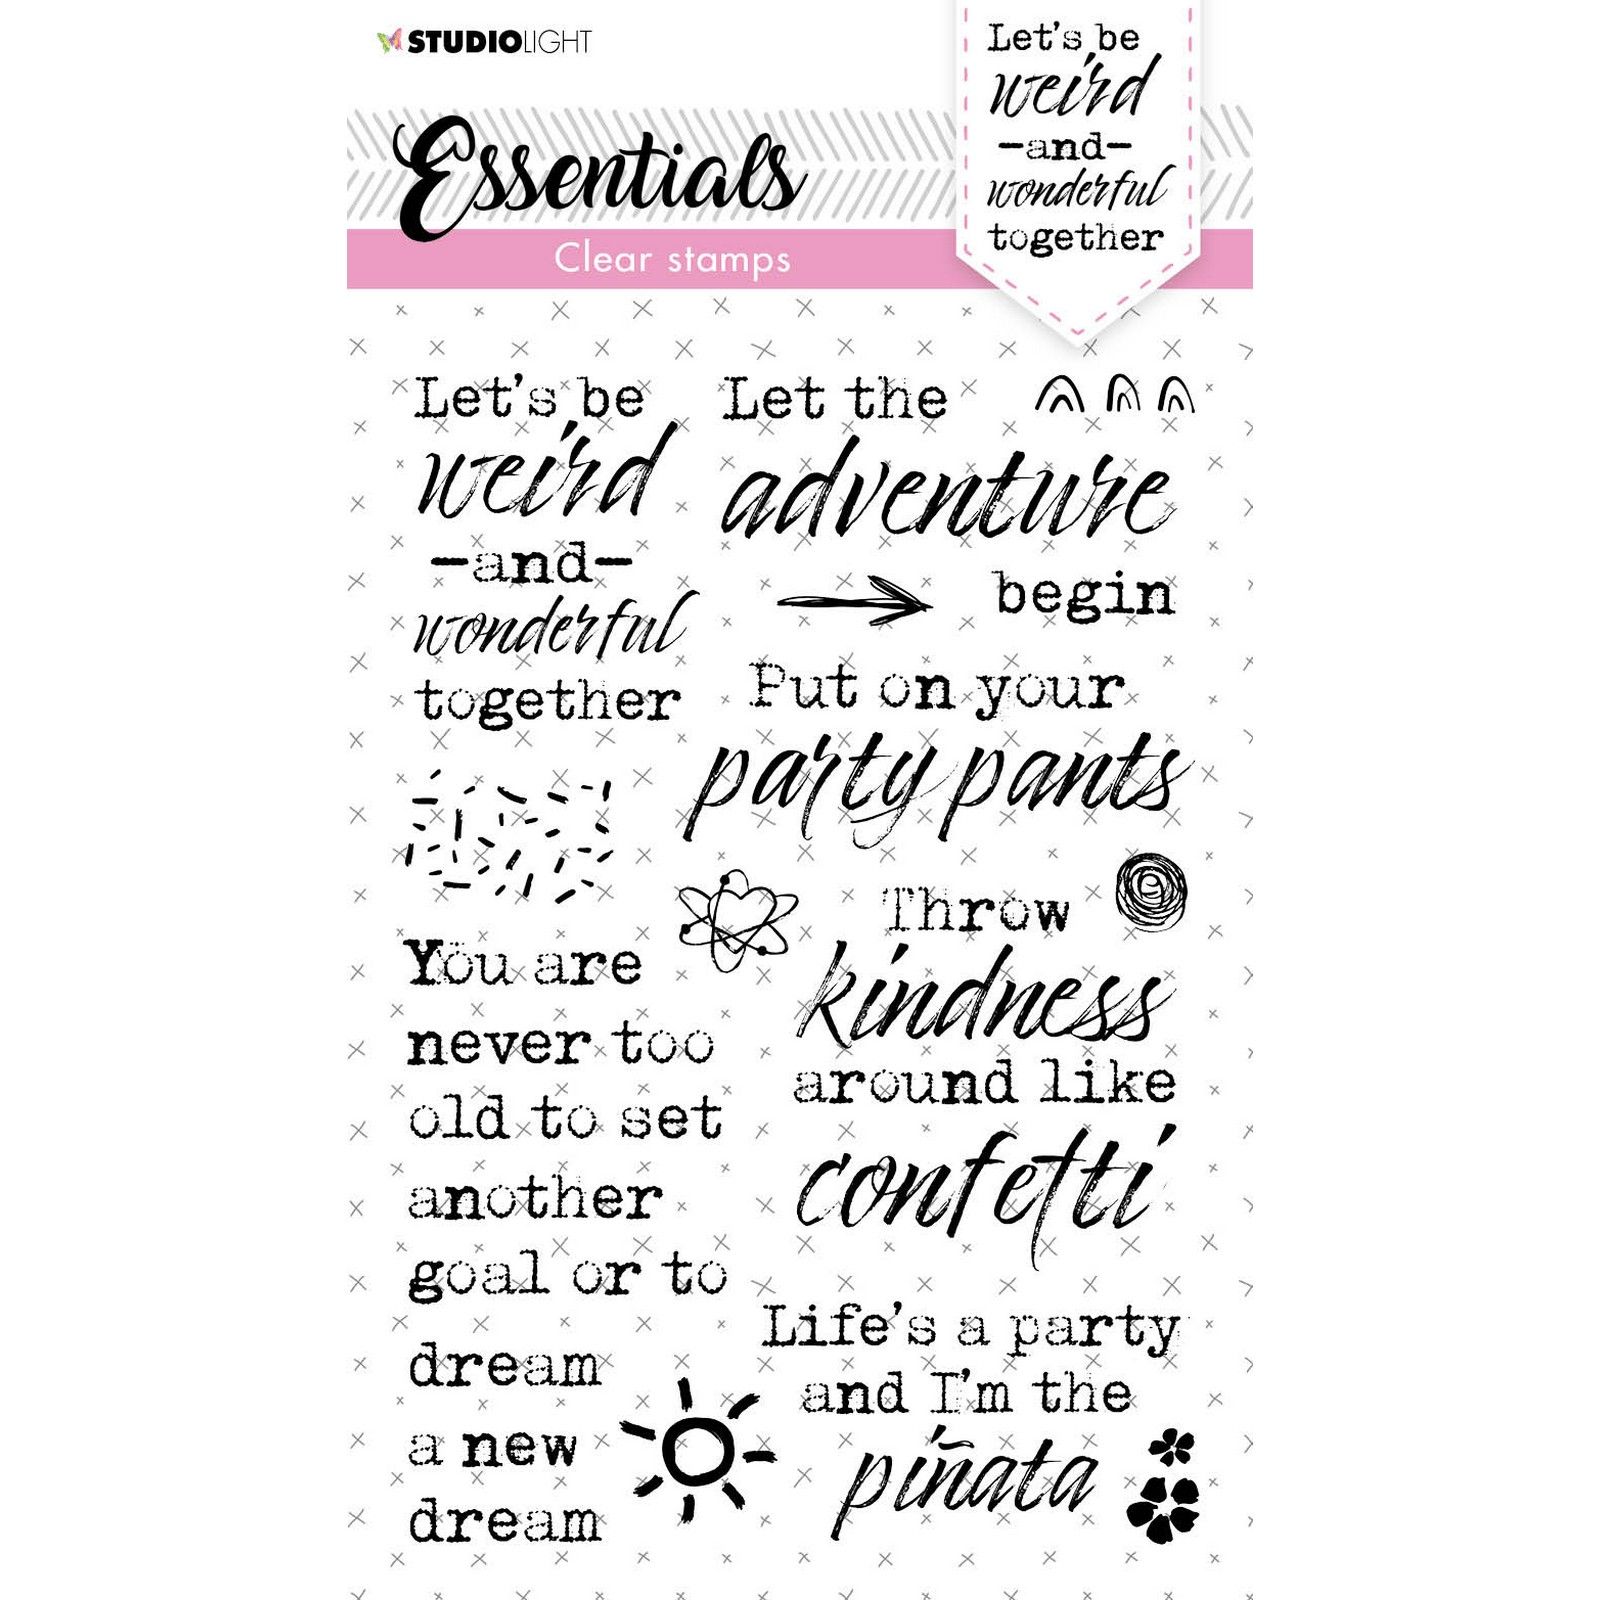 Studio Light • Essentials clear stamp Let's be weird nr.120